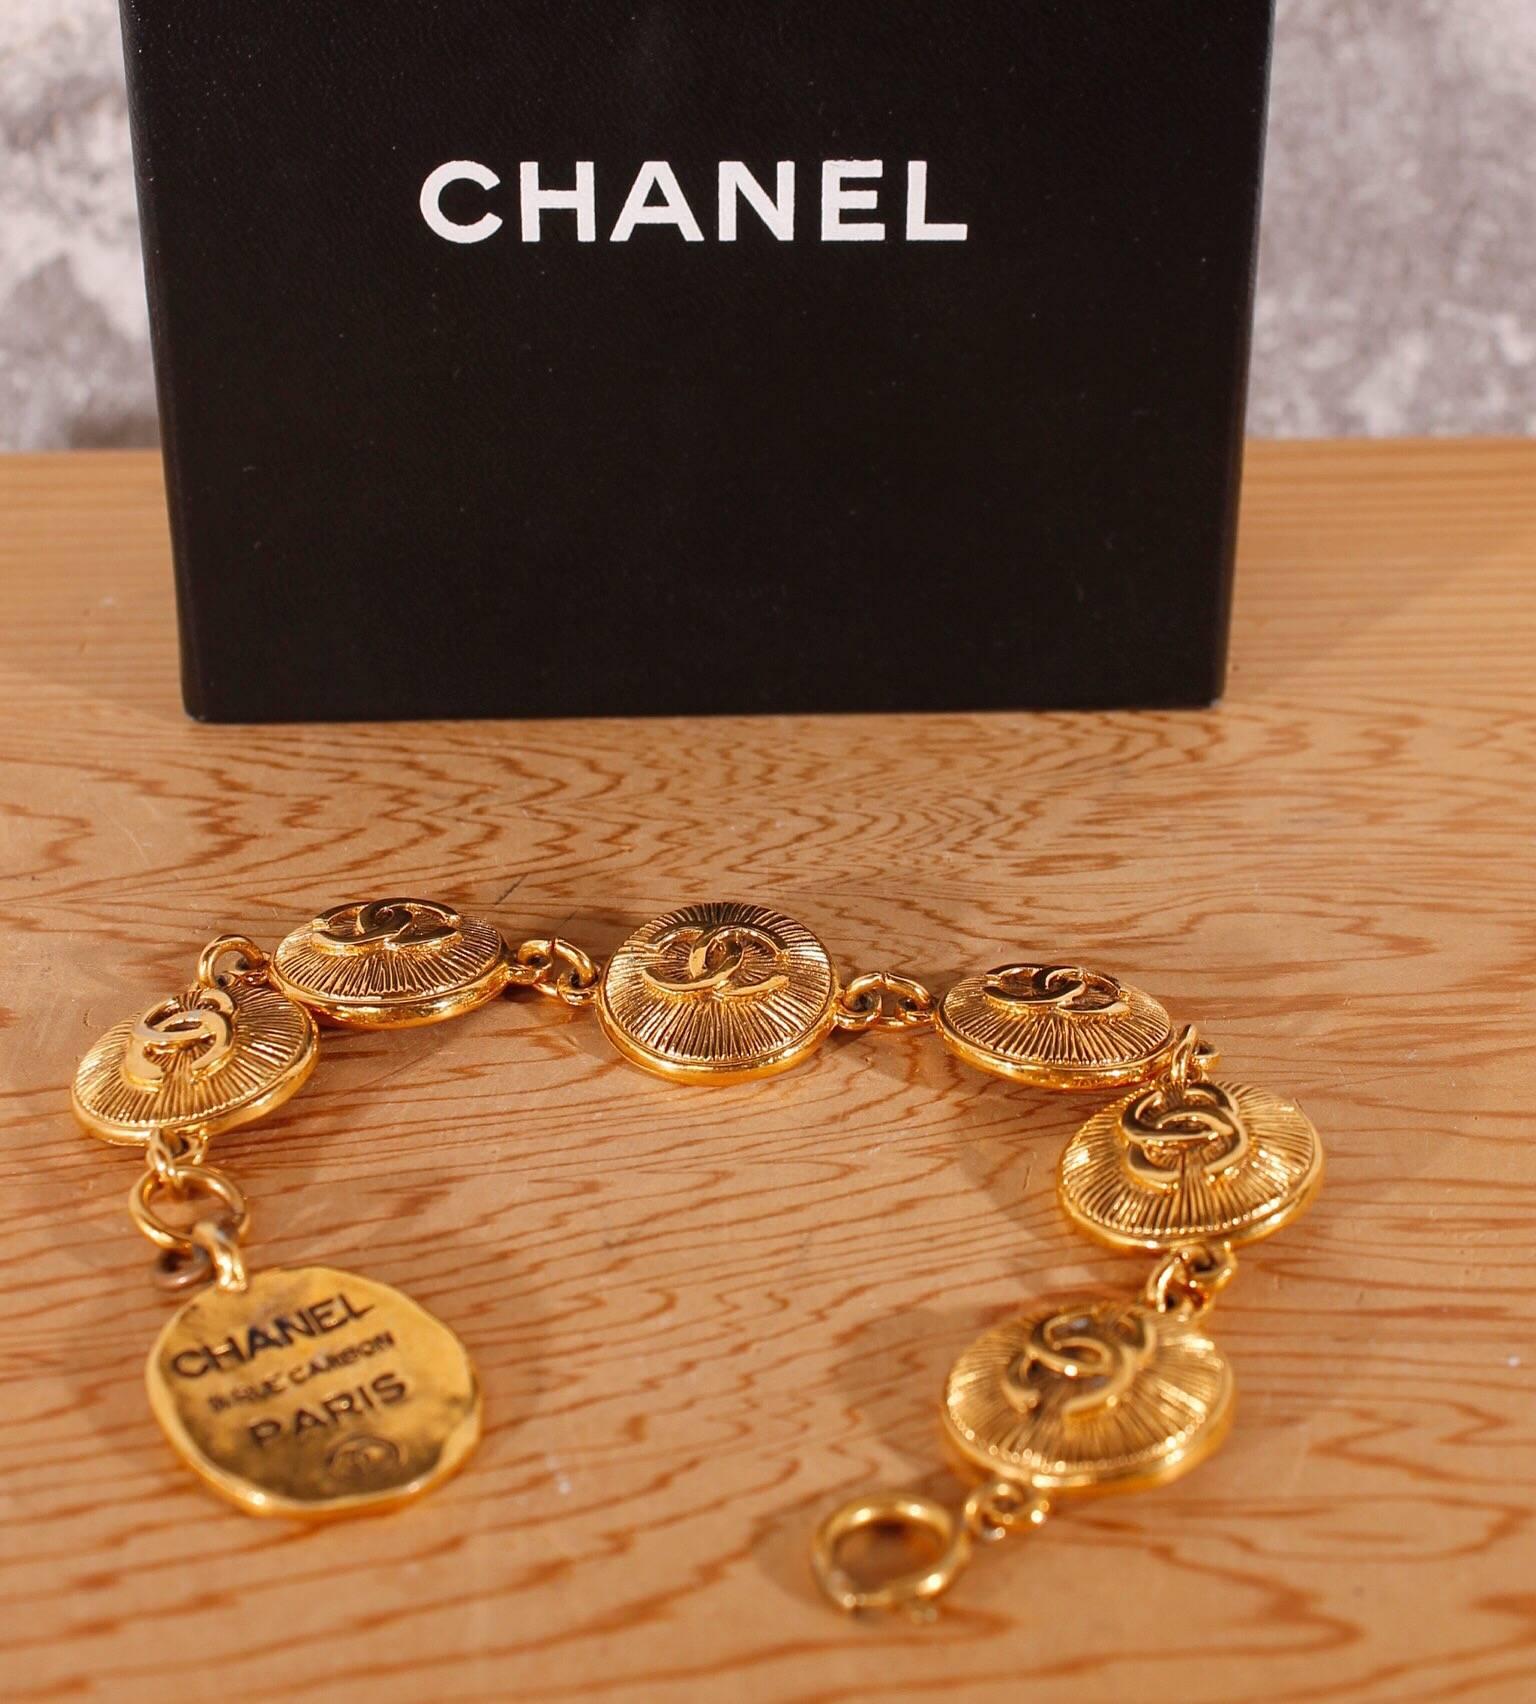 Straight from the eighties is this Chanel Rue Cambon Paris bracelet! Nice!

A gold plated bracelet of six golden medaillons with a large CC-logo in the middle. Around the logo little stripes like sunbeams. At the back of the medaillion a